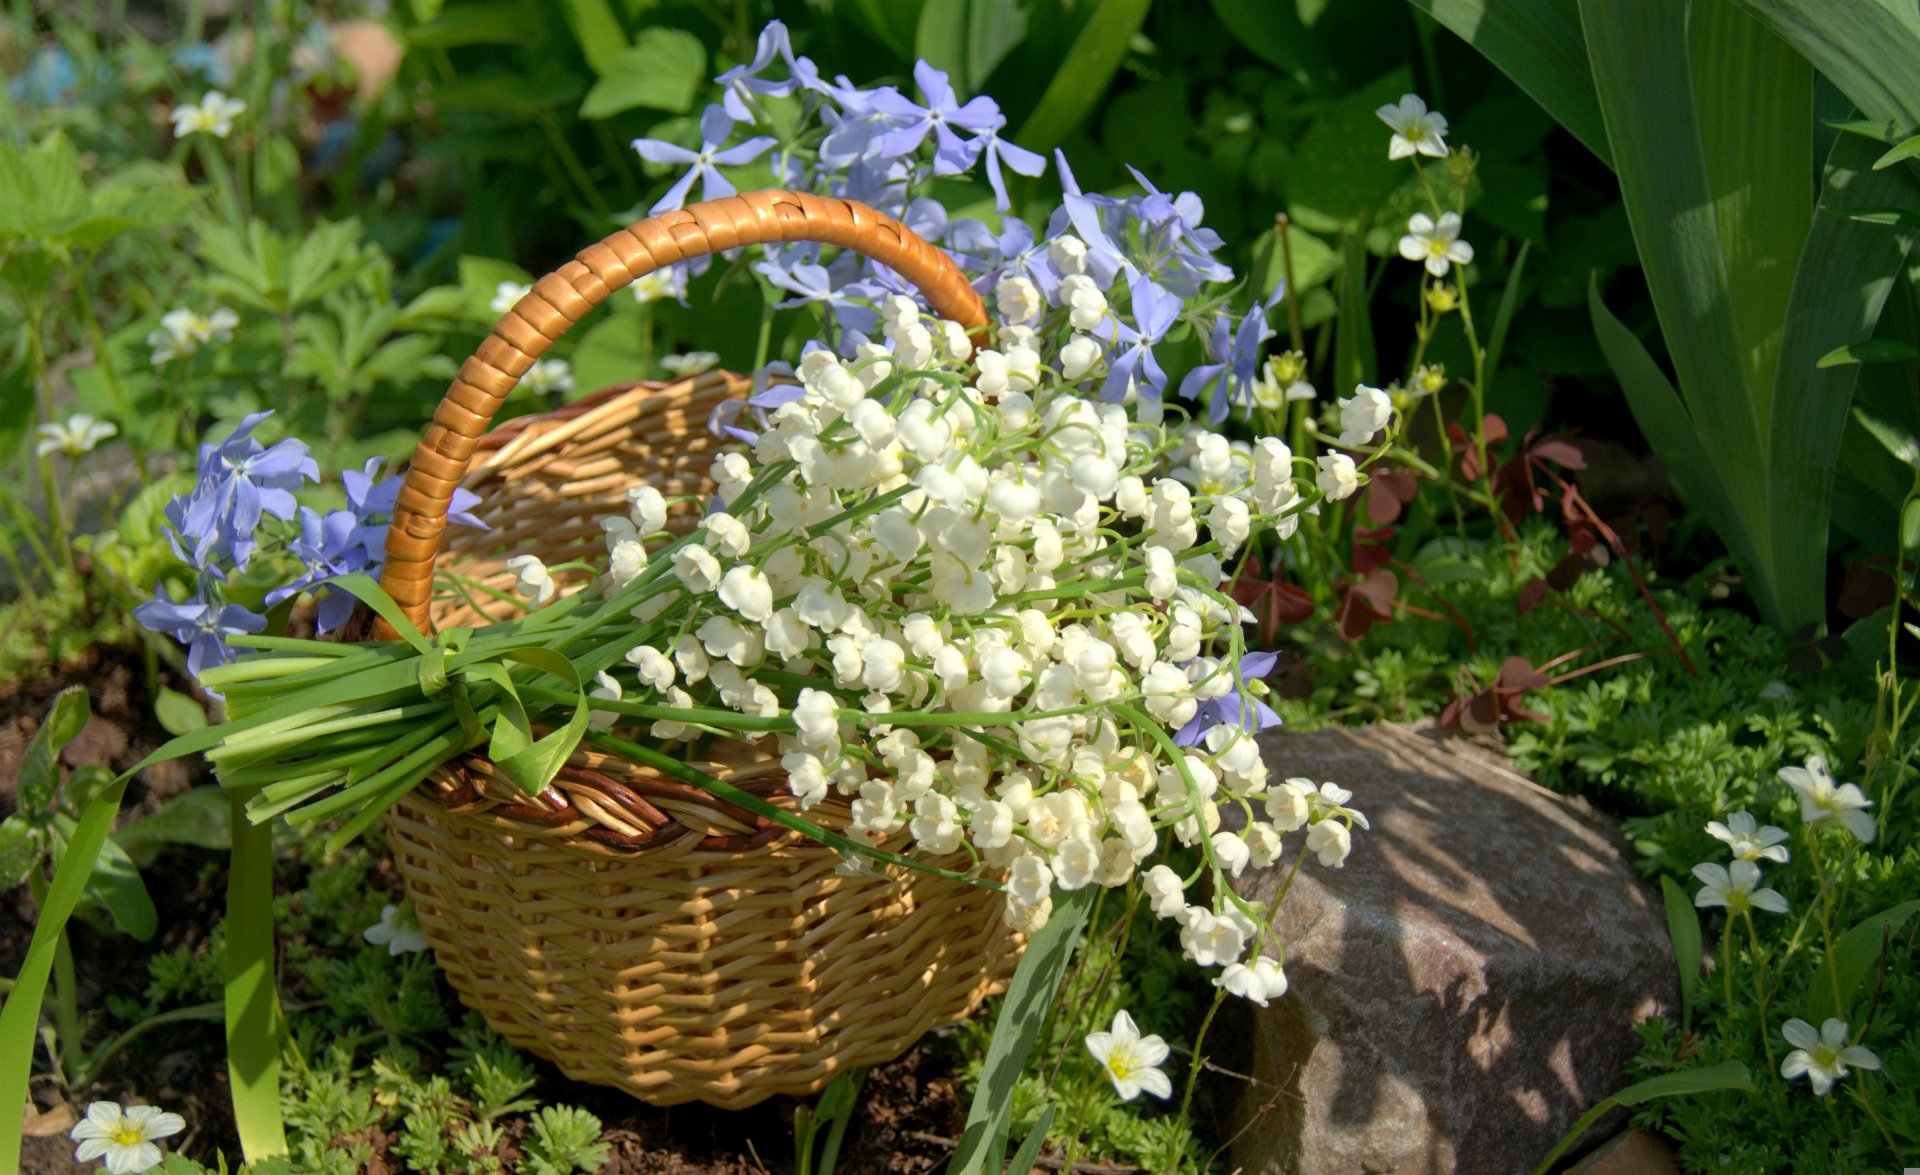 Lilies Of The Valley In Basket Hd Wallpaper Background Image